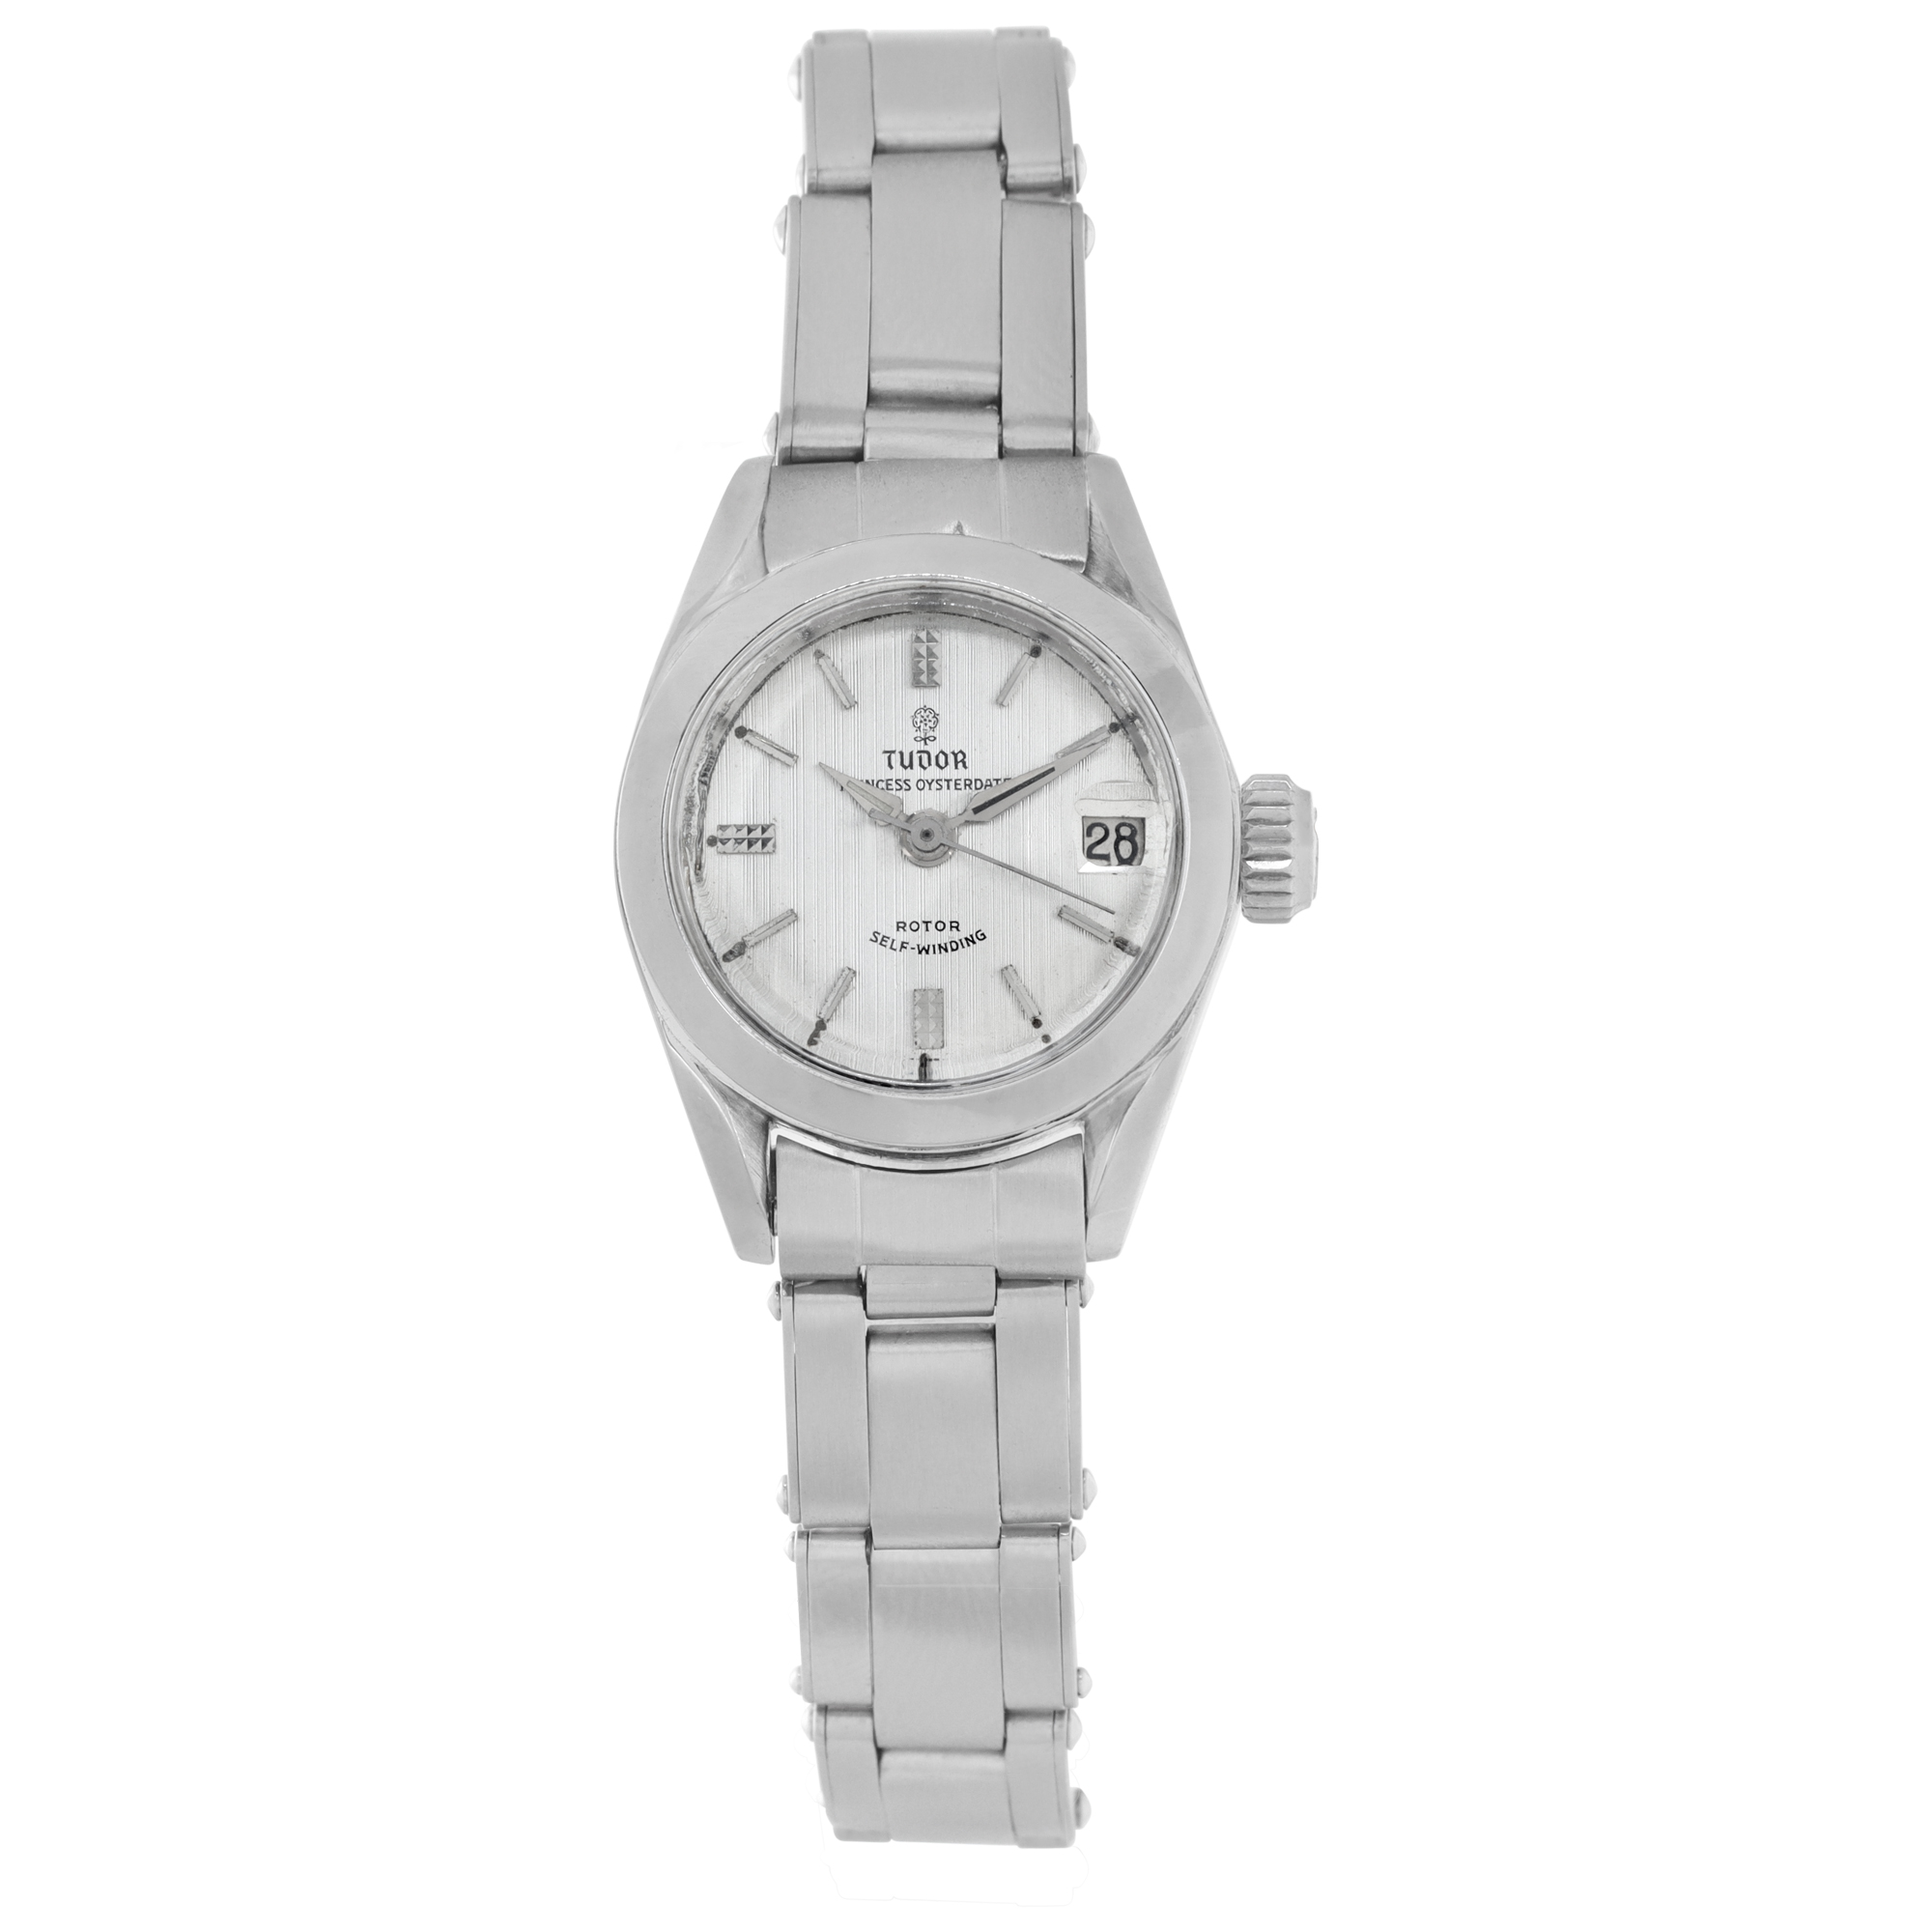 Tudor Oyster Date 22mm 7981 (Watches)